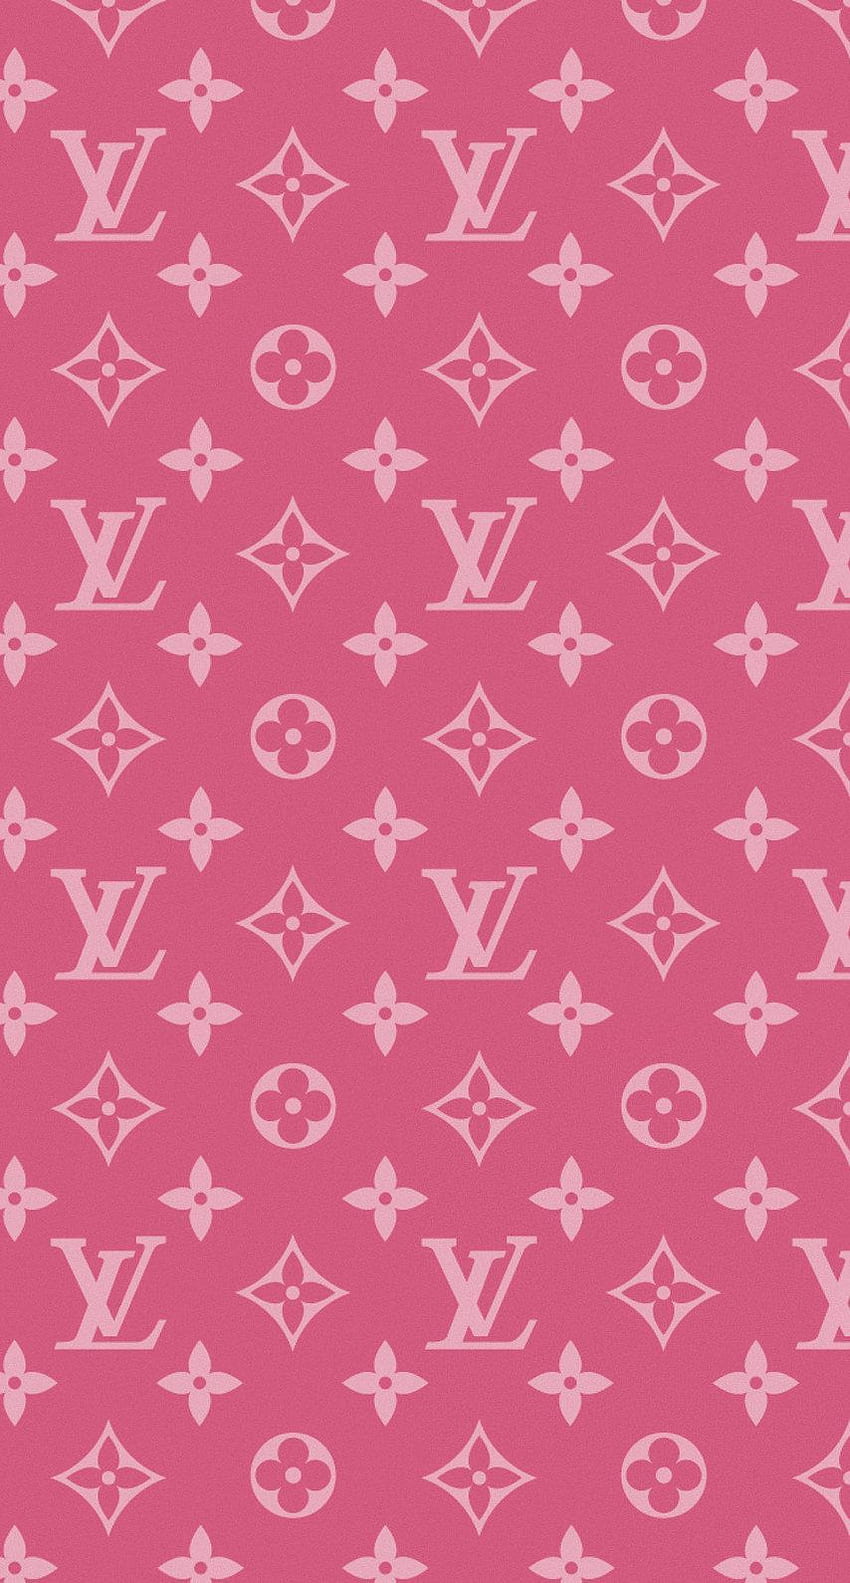 Gucci Louis Vuitton Supreme iPhone Wallpapers Free Download